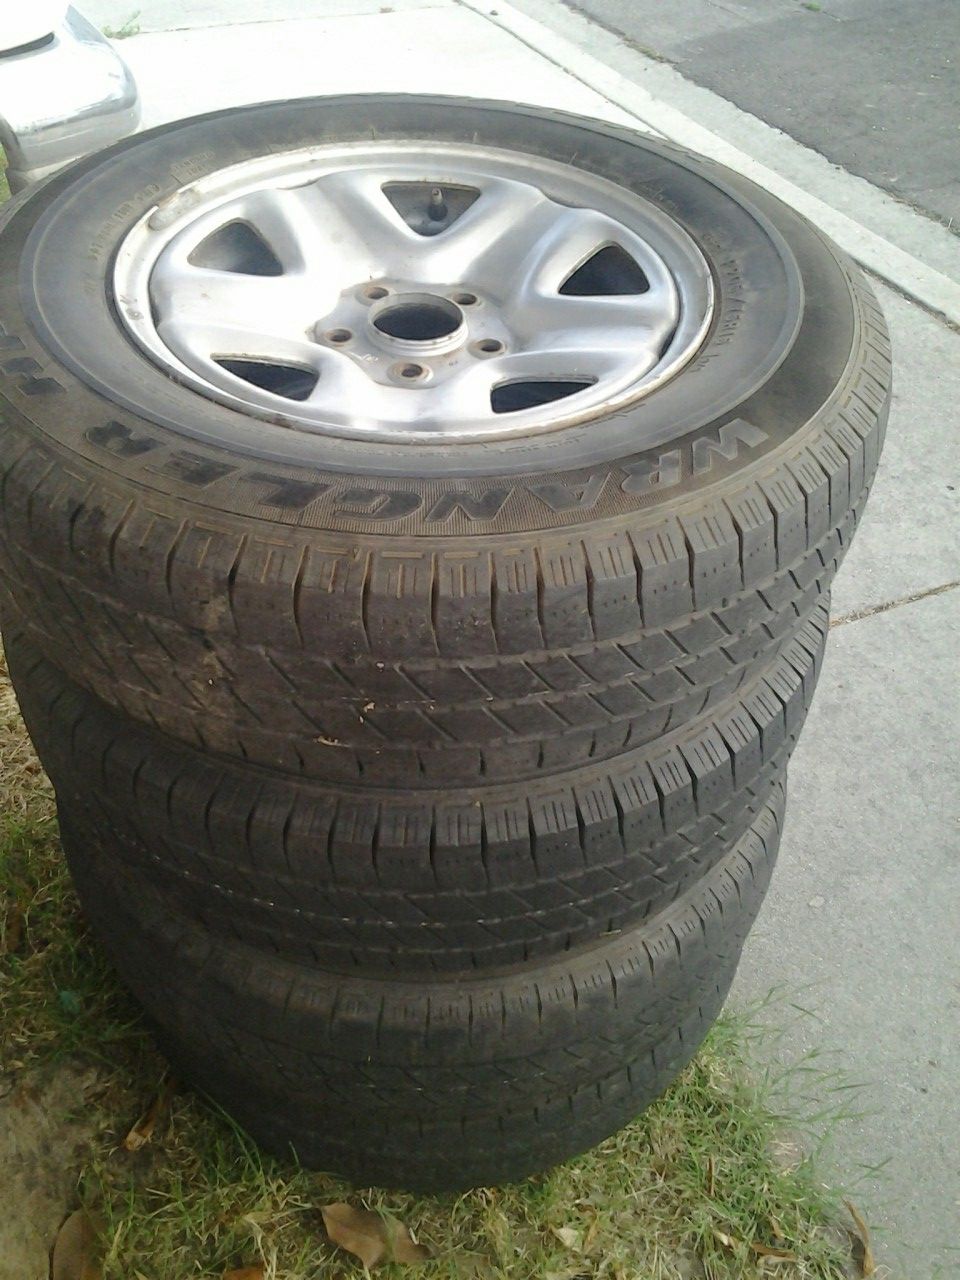 FREE,, JEEP,,15 TIRES AND RIMS